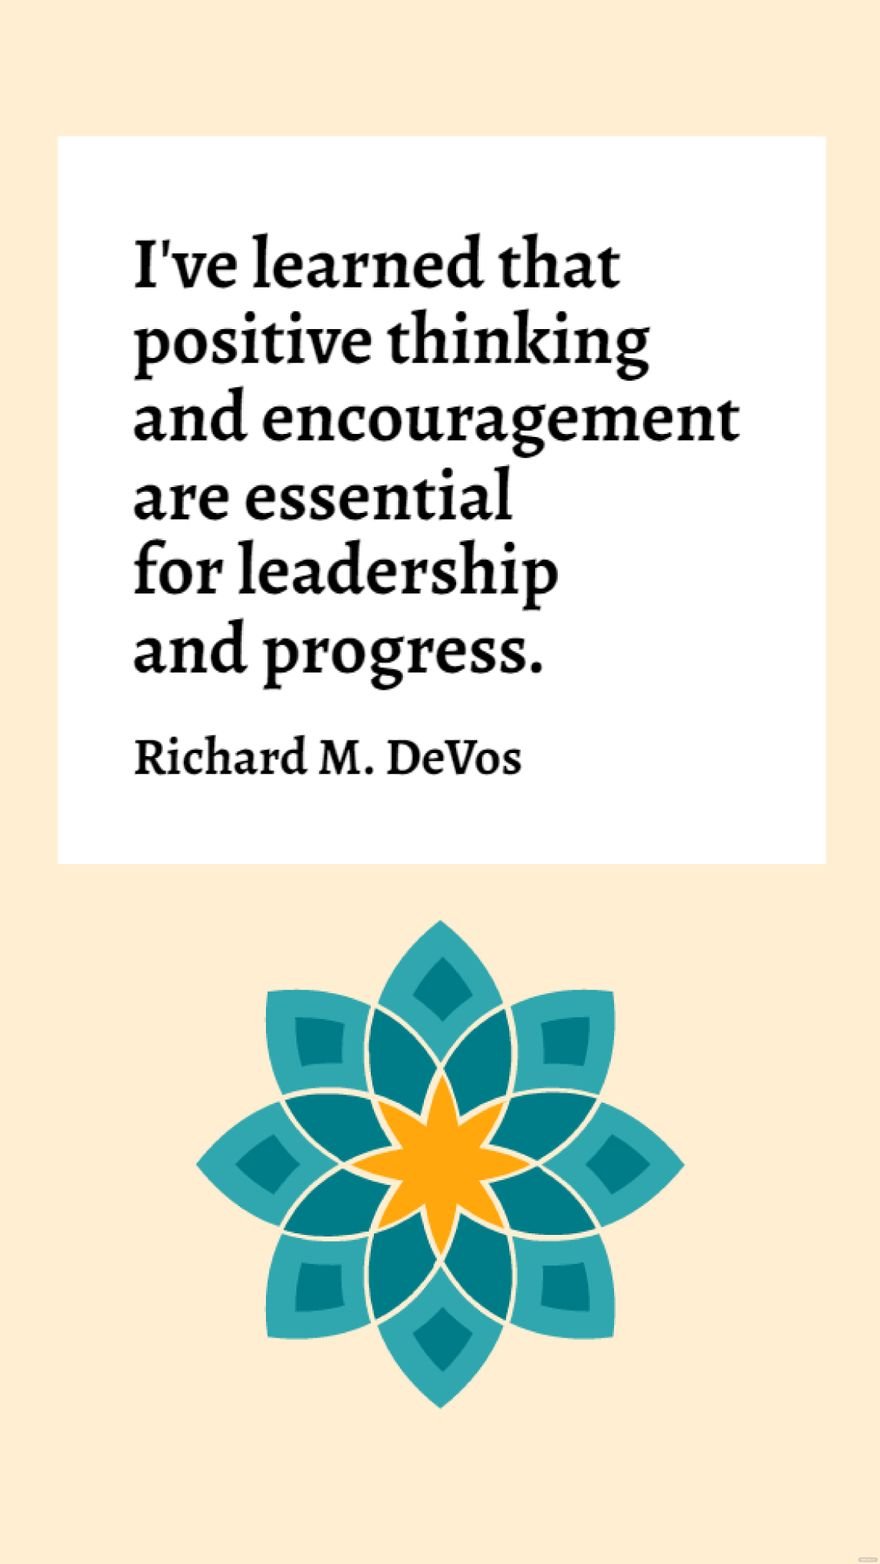 Free Richard M. DeVos - I've learned that positive thinking and encouragement are essential for leadership and progress.